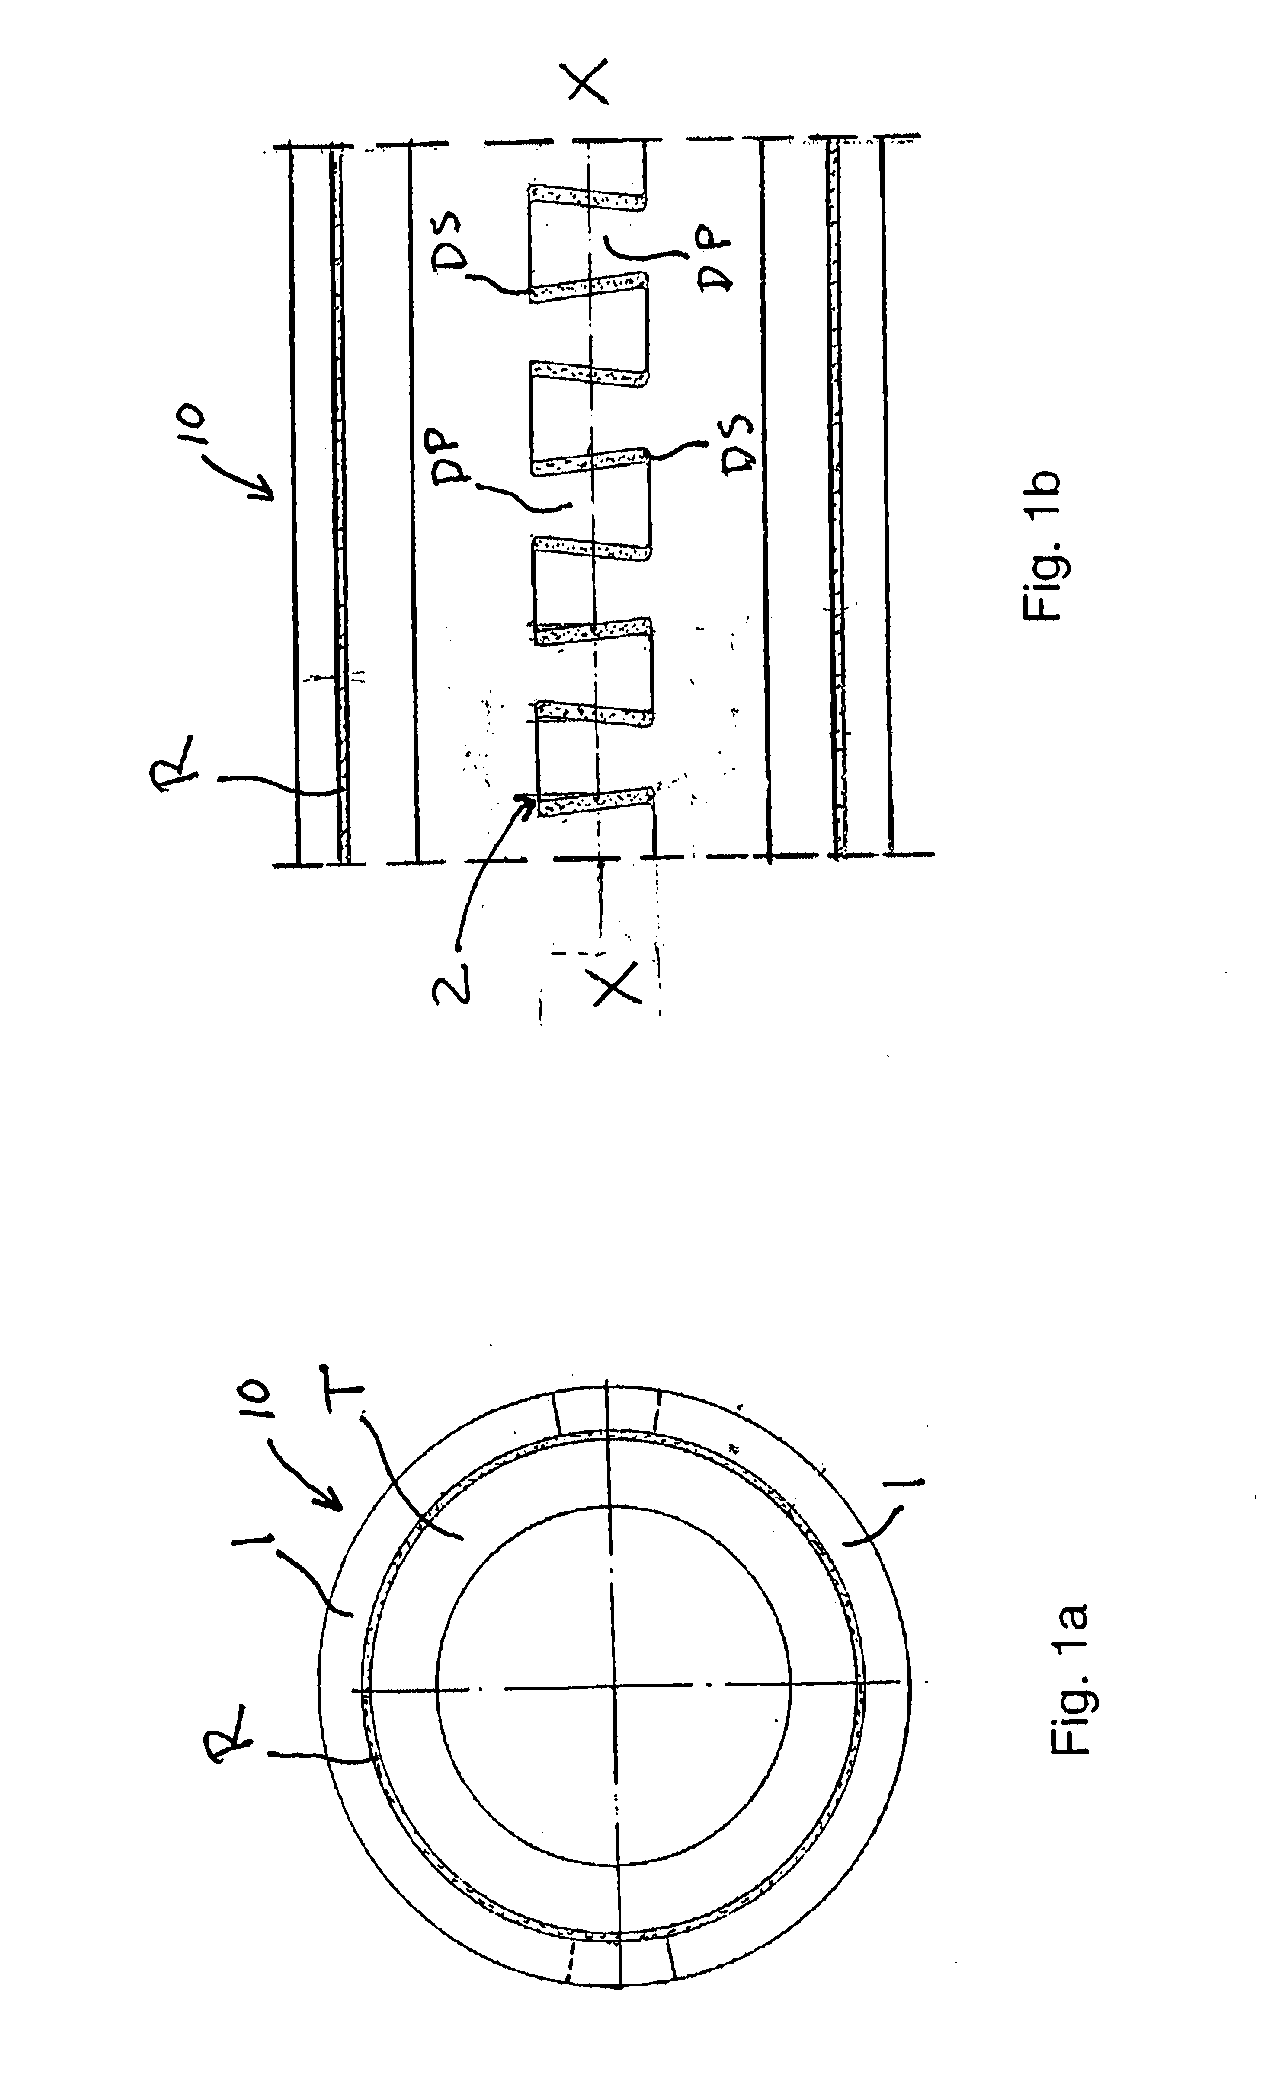 Tube shield and a method for attaching such shield to a boiler tube